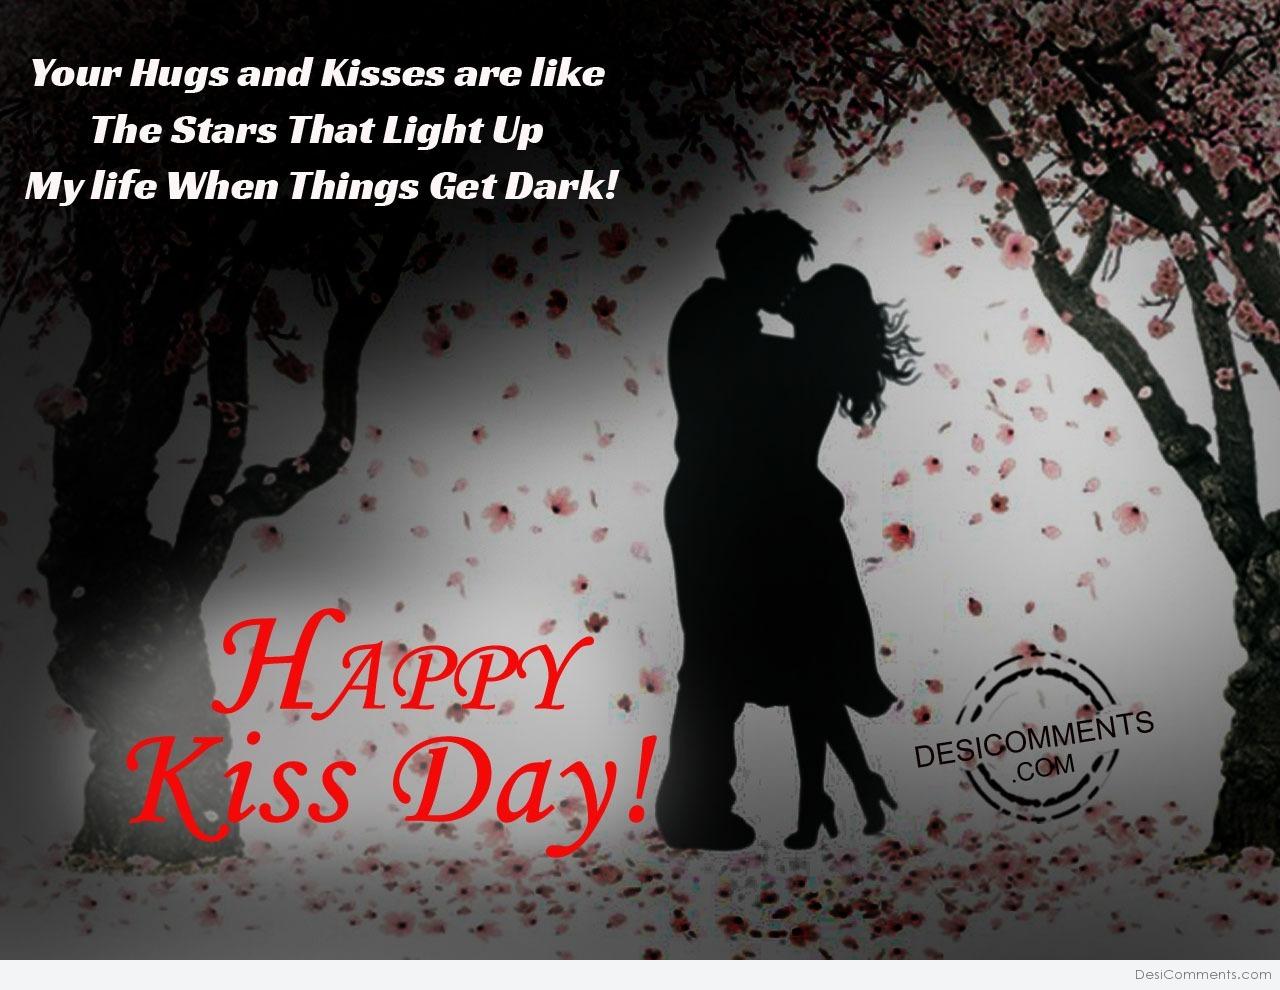 Your hugs and kiss, happy kiss day - DesiComments.com